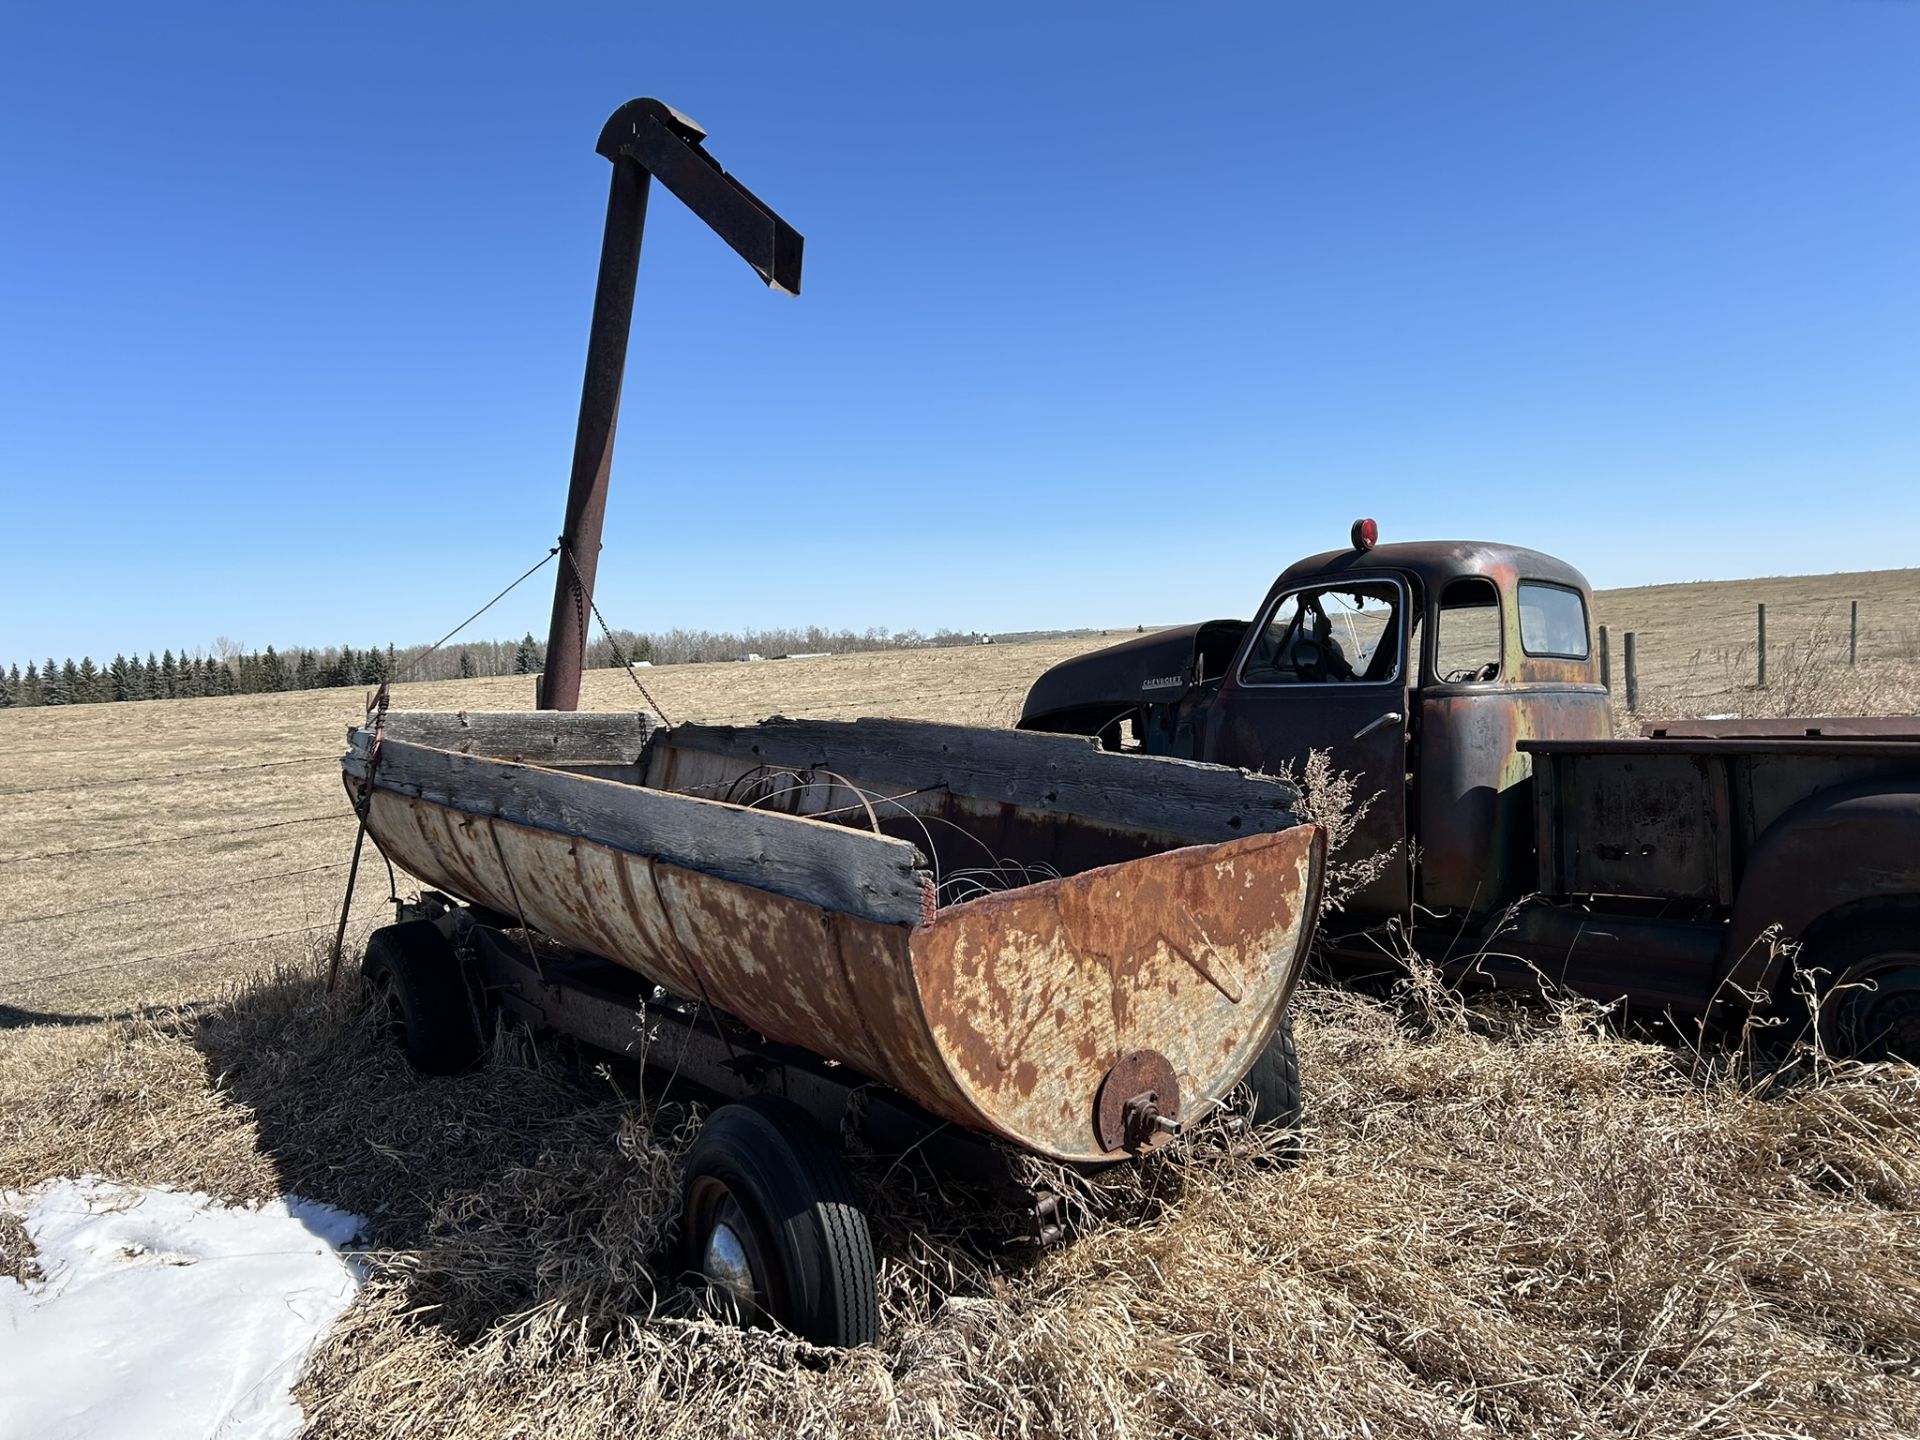 **OFFSITE** ANTIQUE CUSTOM GRAIN CART - LOCATED 40515 RANGE ROAD 245, CLIVE, AB, VEIWING AND REMOVAL